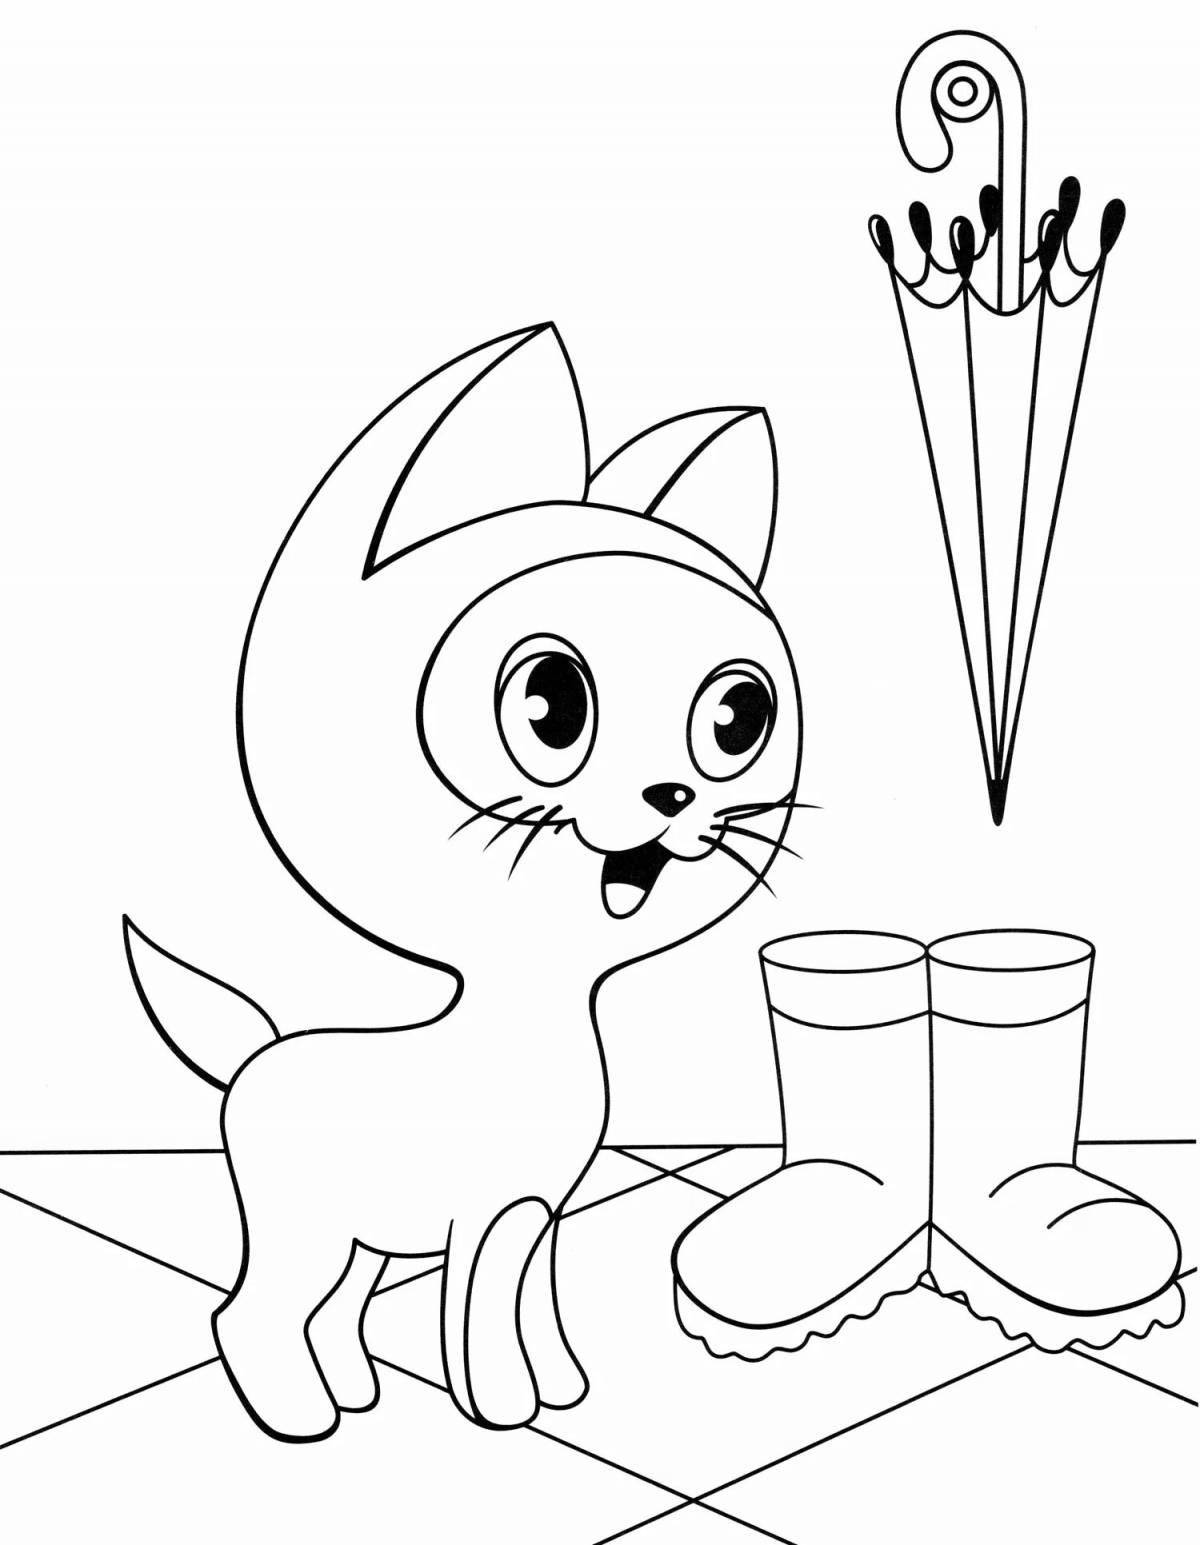 Incredible woof kitty coloring book for kids